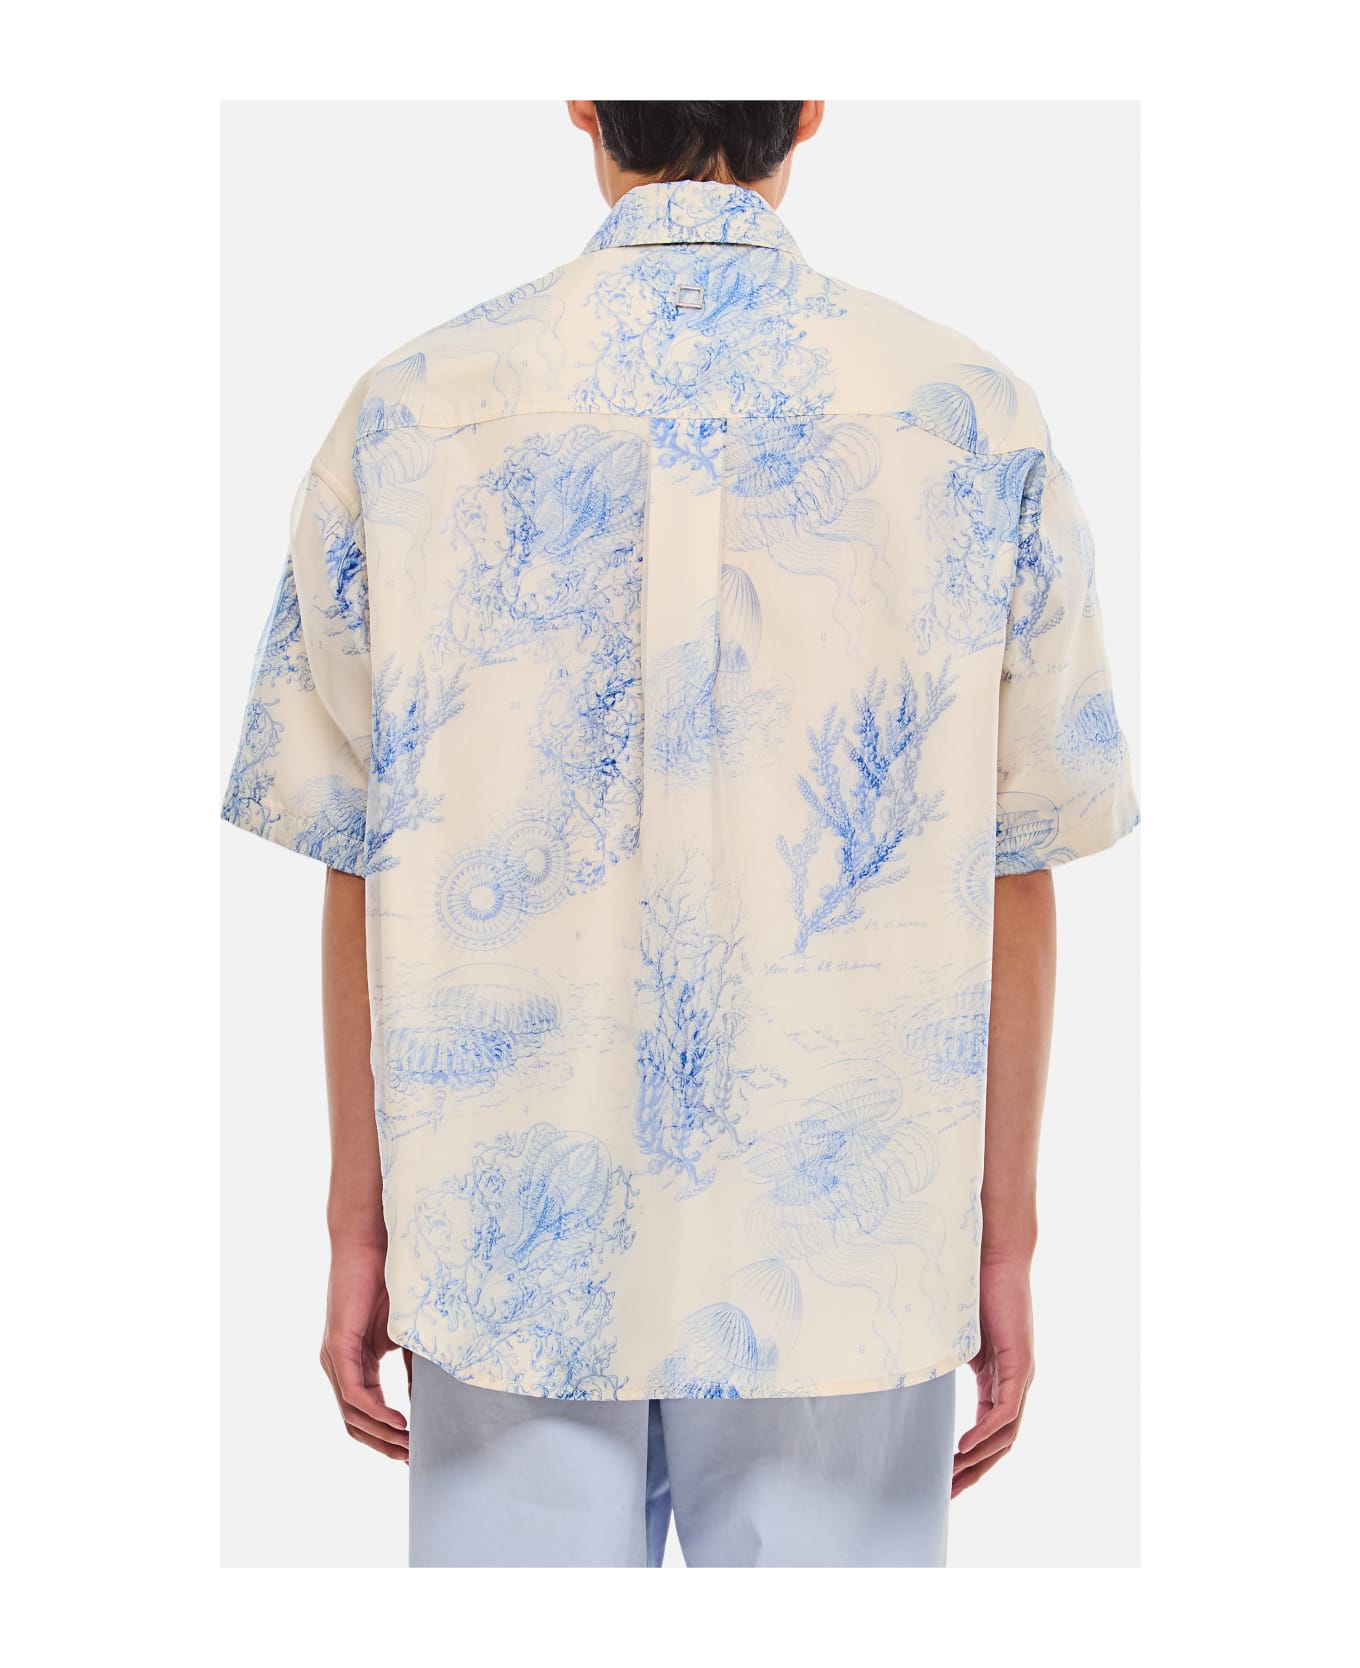 WOOYOUNGMI Printed Cotton Shirt - White